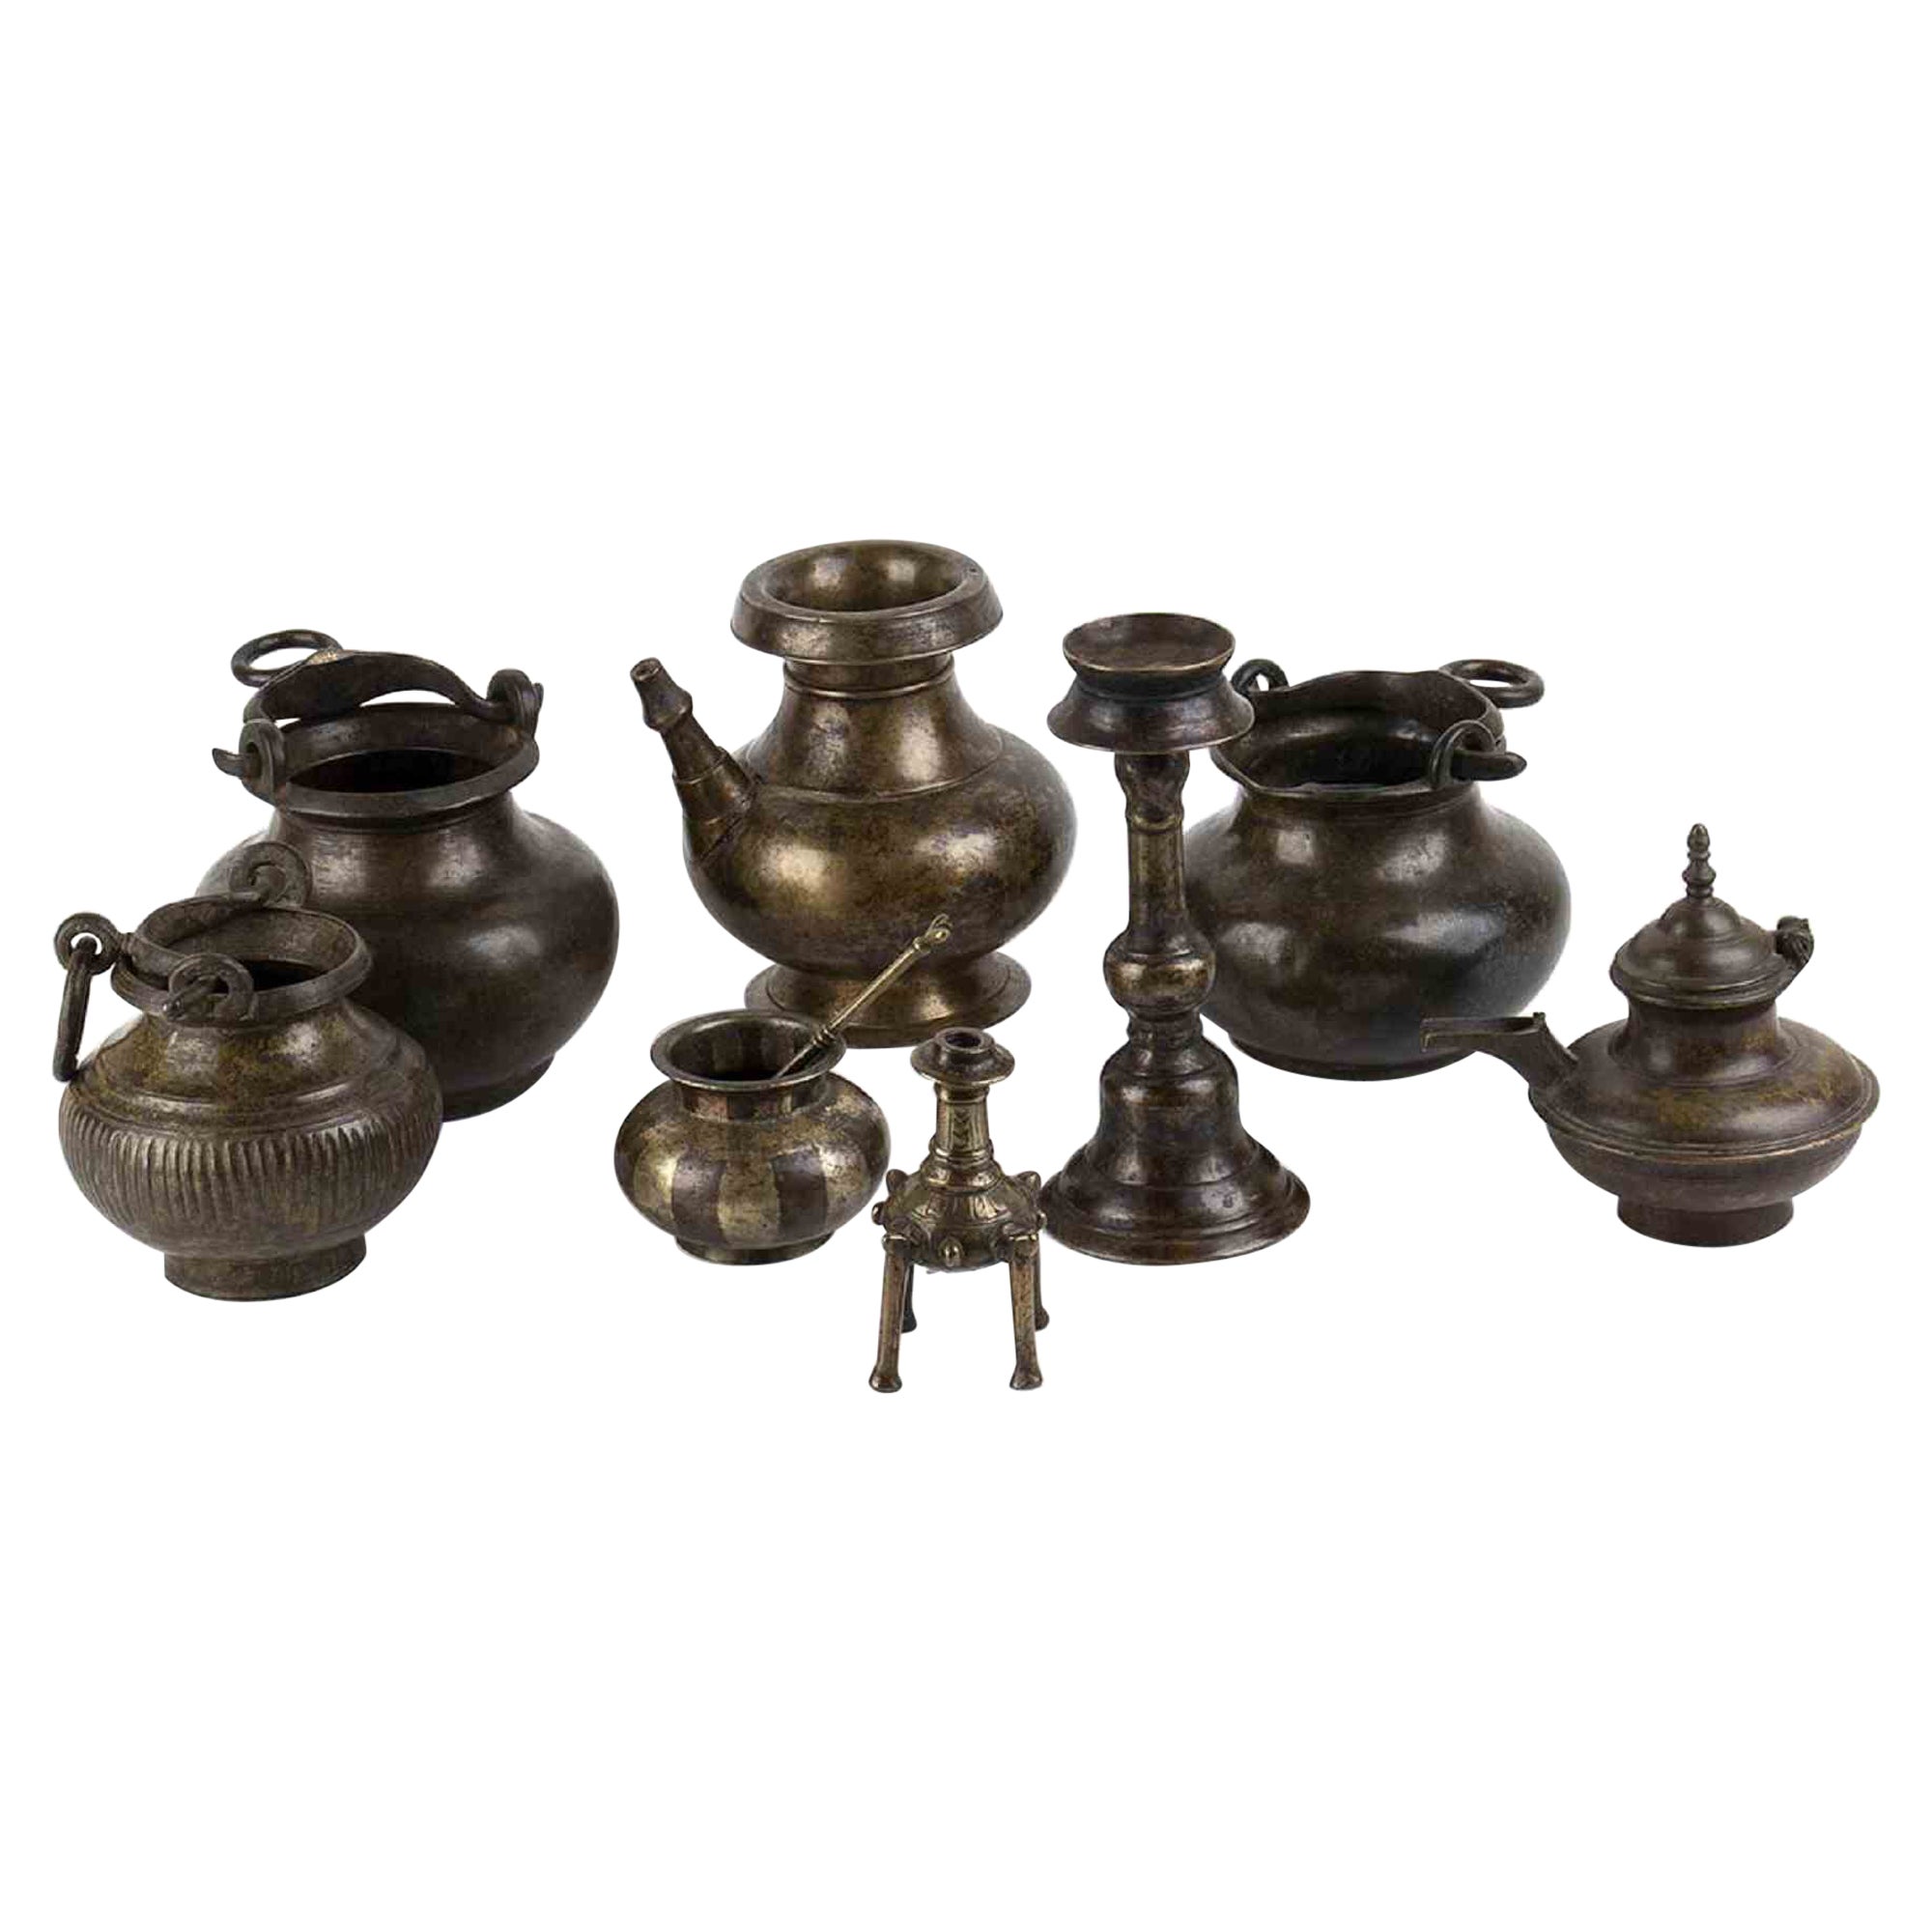 Set of Eight Copper Alloy Containers, One with a Spoon, India, 19th-20th Century